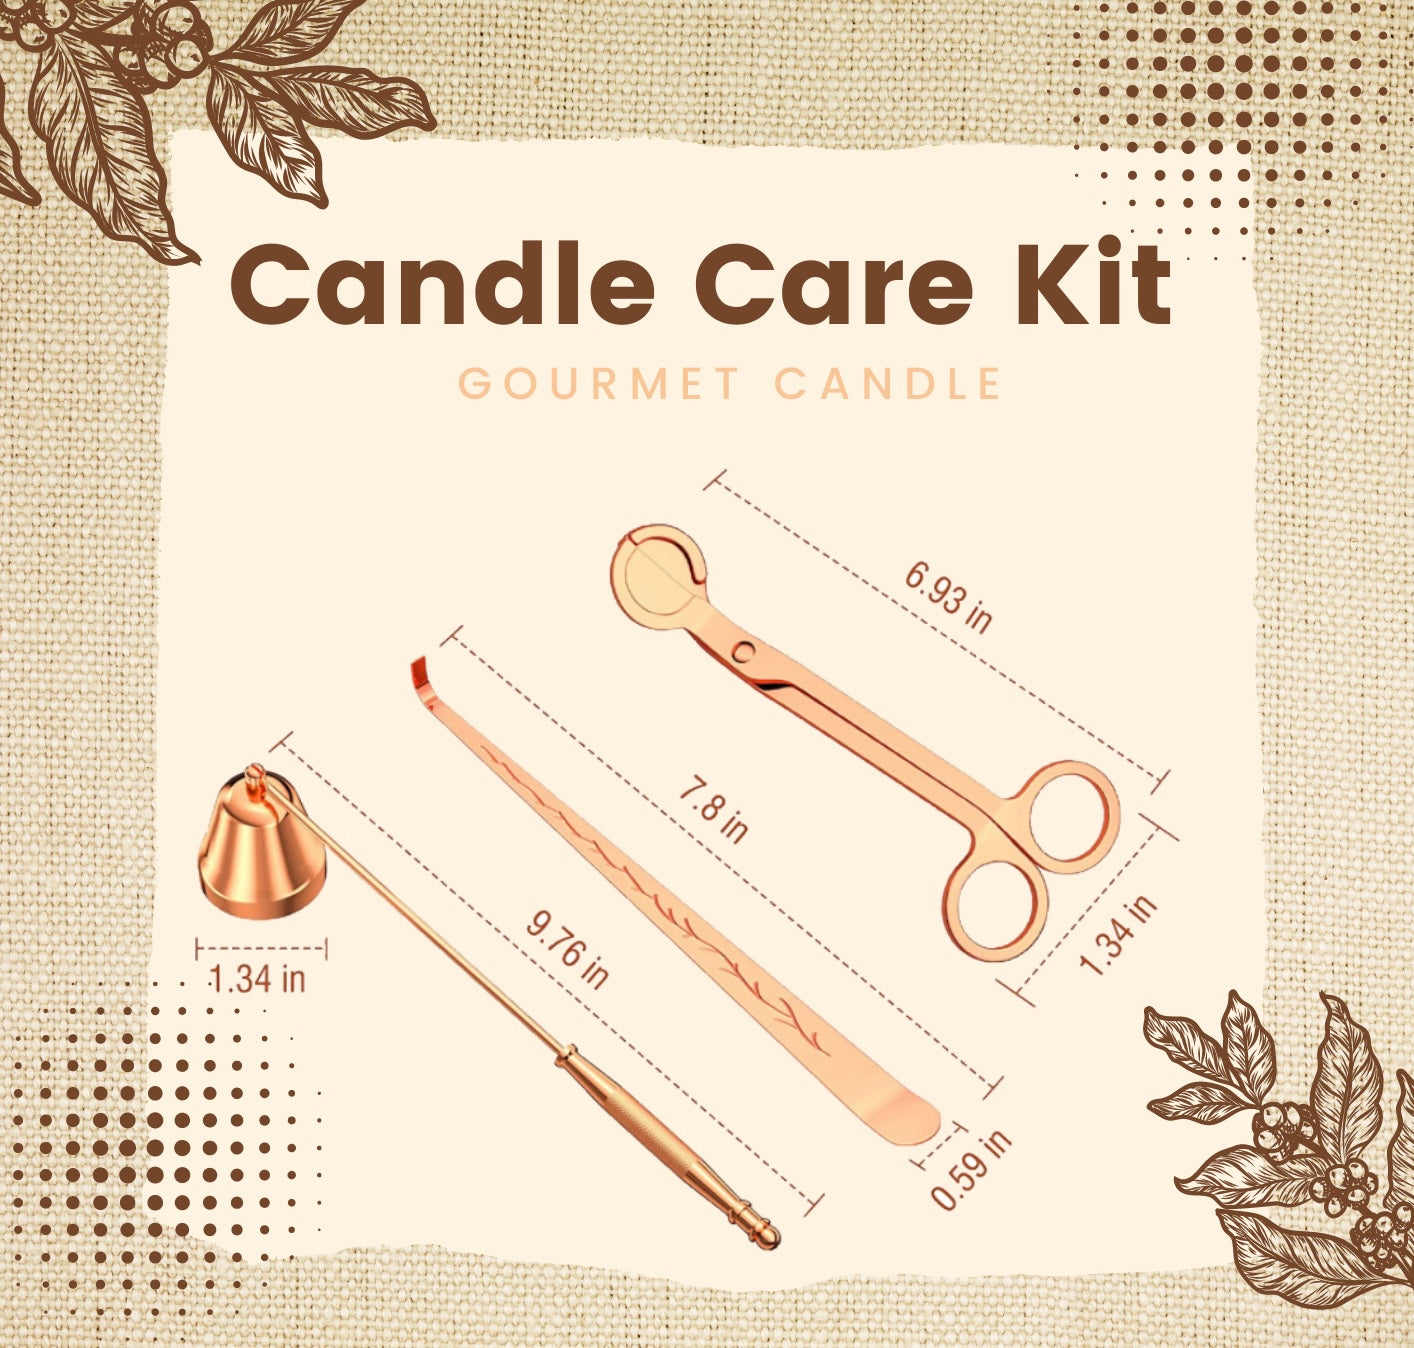 CRAFSET- 3pc Candle Care Kit, Wick Trimmer, Candle Snuffer, Candle